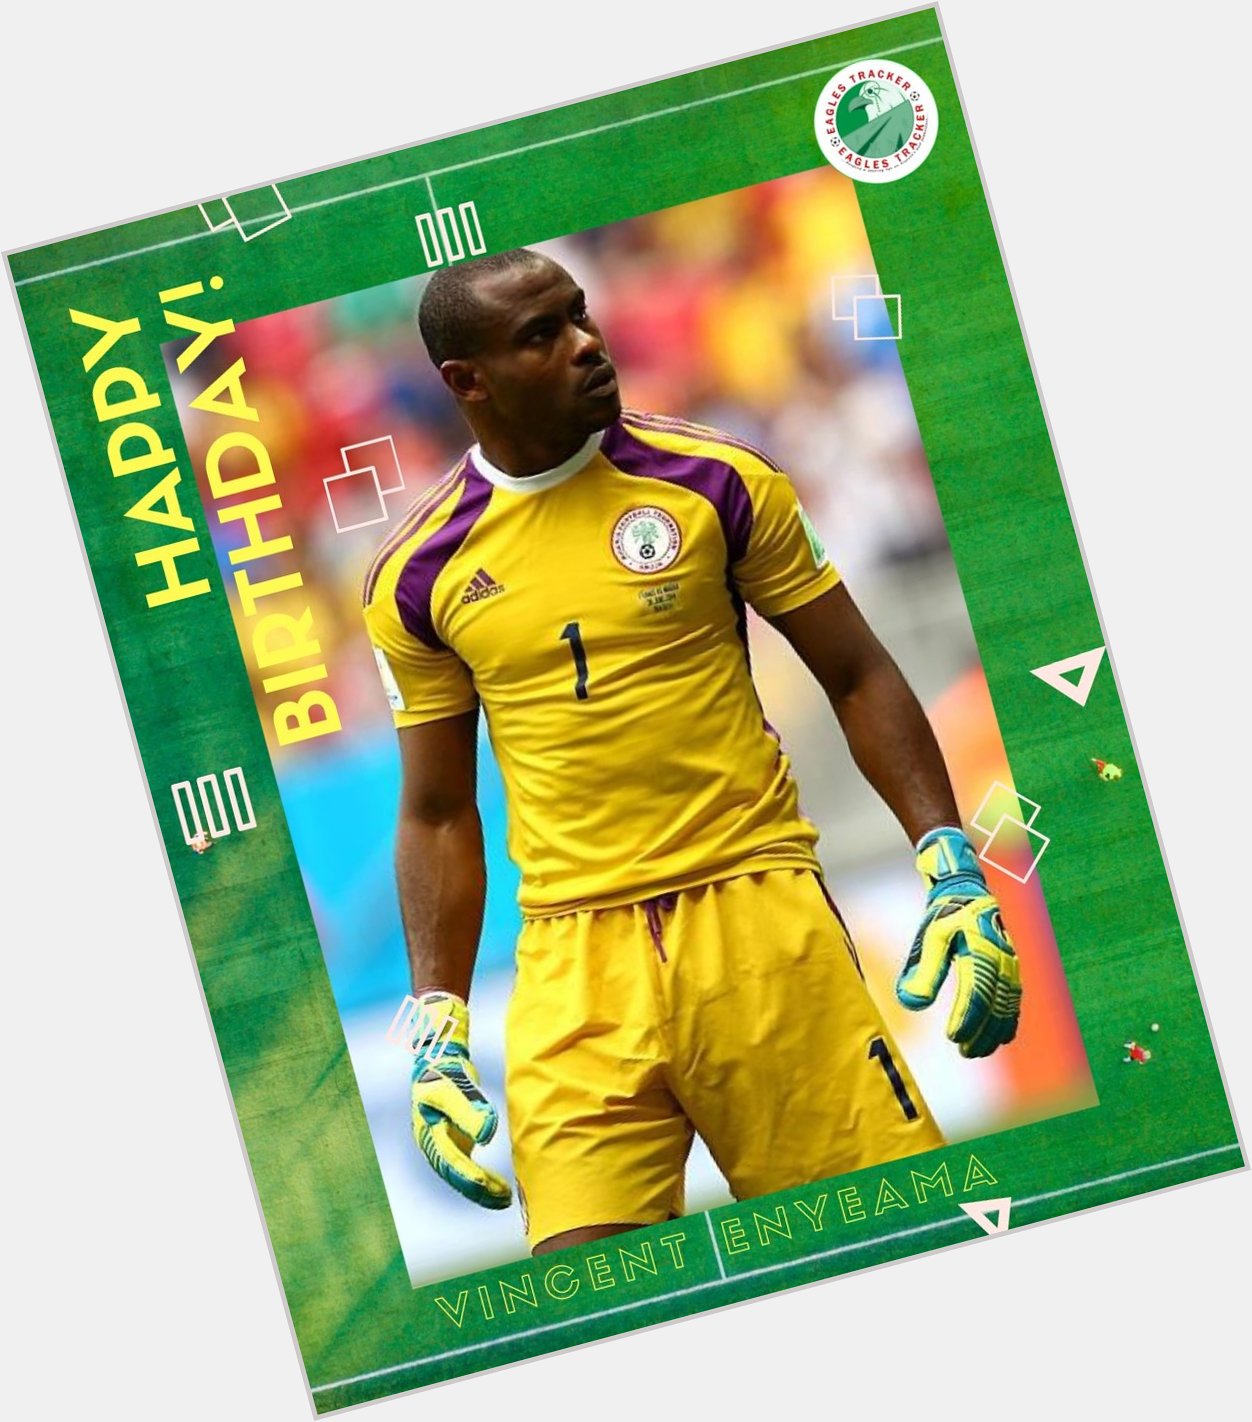 101 National Team Caps
Happy Birthday to Super Eagles Legend, Vincent Enyeama. 